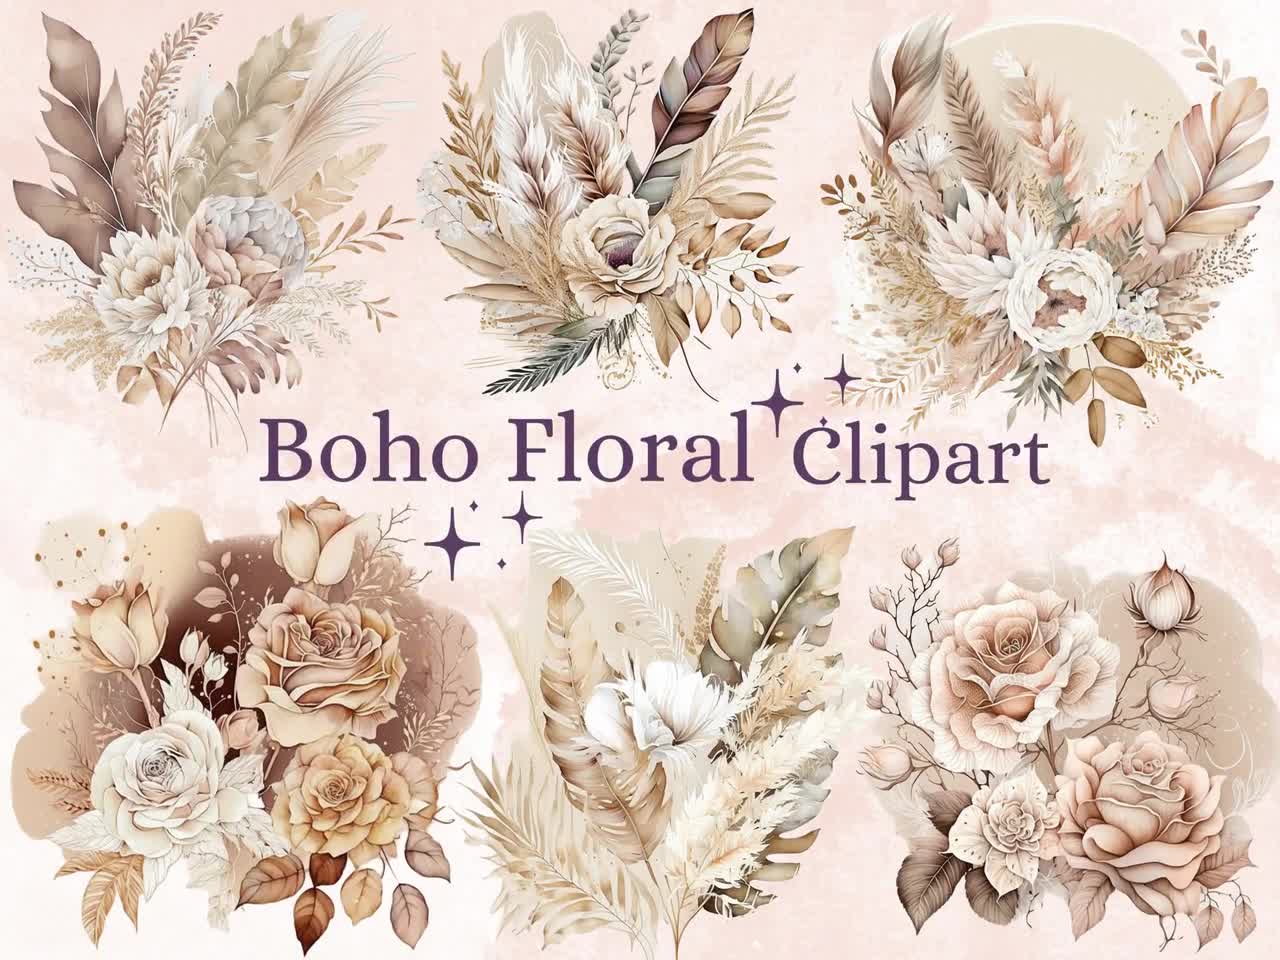 Crystal Flowers Clipart PNG Set, 25 Crystal Flowers Clipart, Commercial Use  Clip Art, Floral Watercolor Art, PNG Crystal Theme Illustrations 